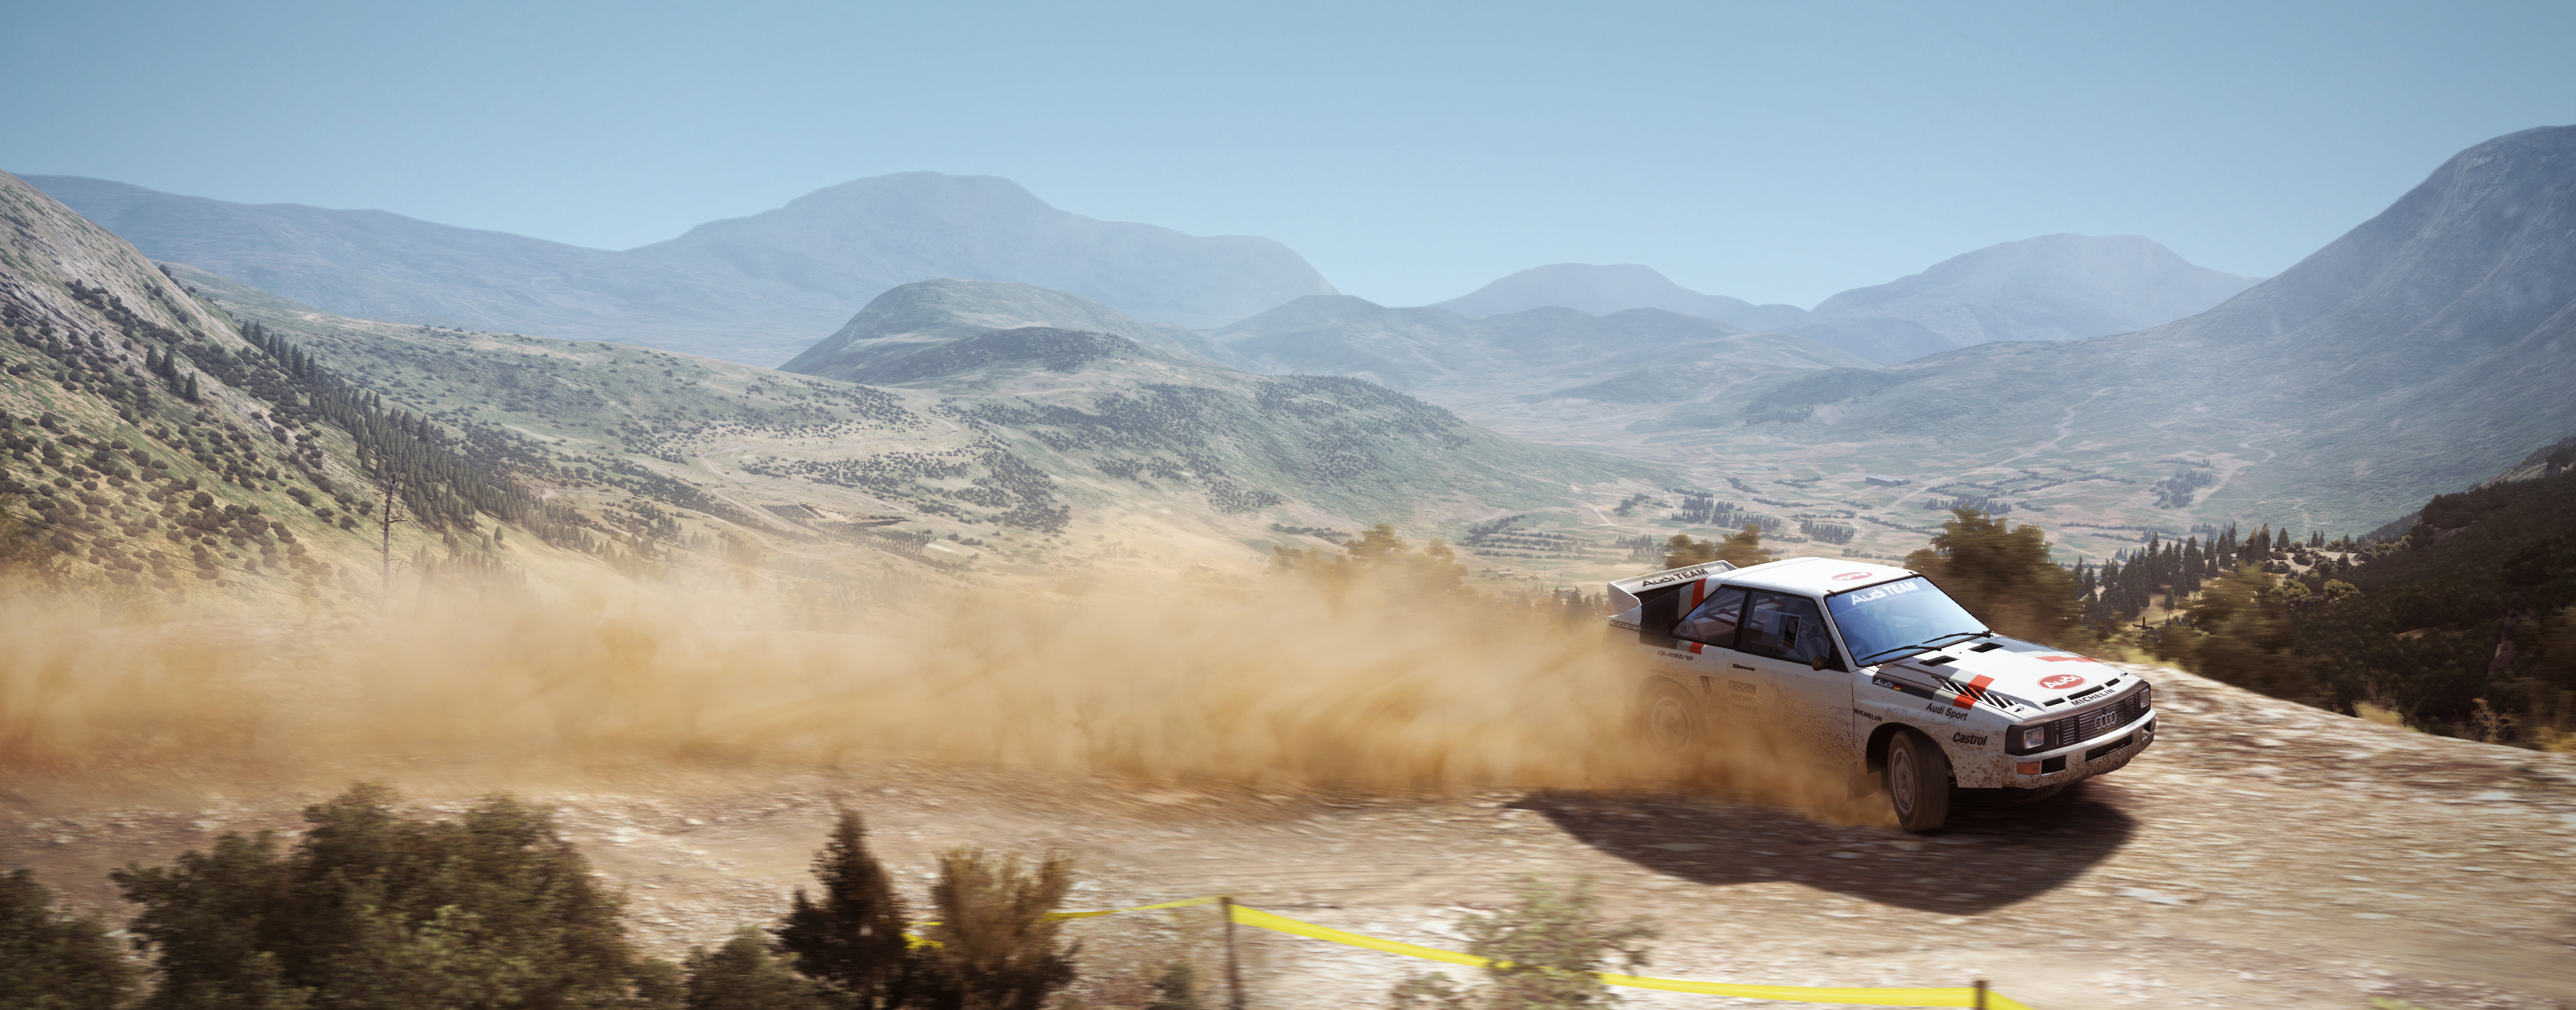 Video Game DiRT Rally HD Wallpaper Background Image. 